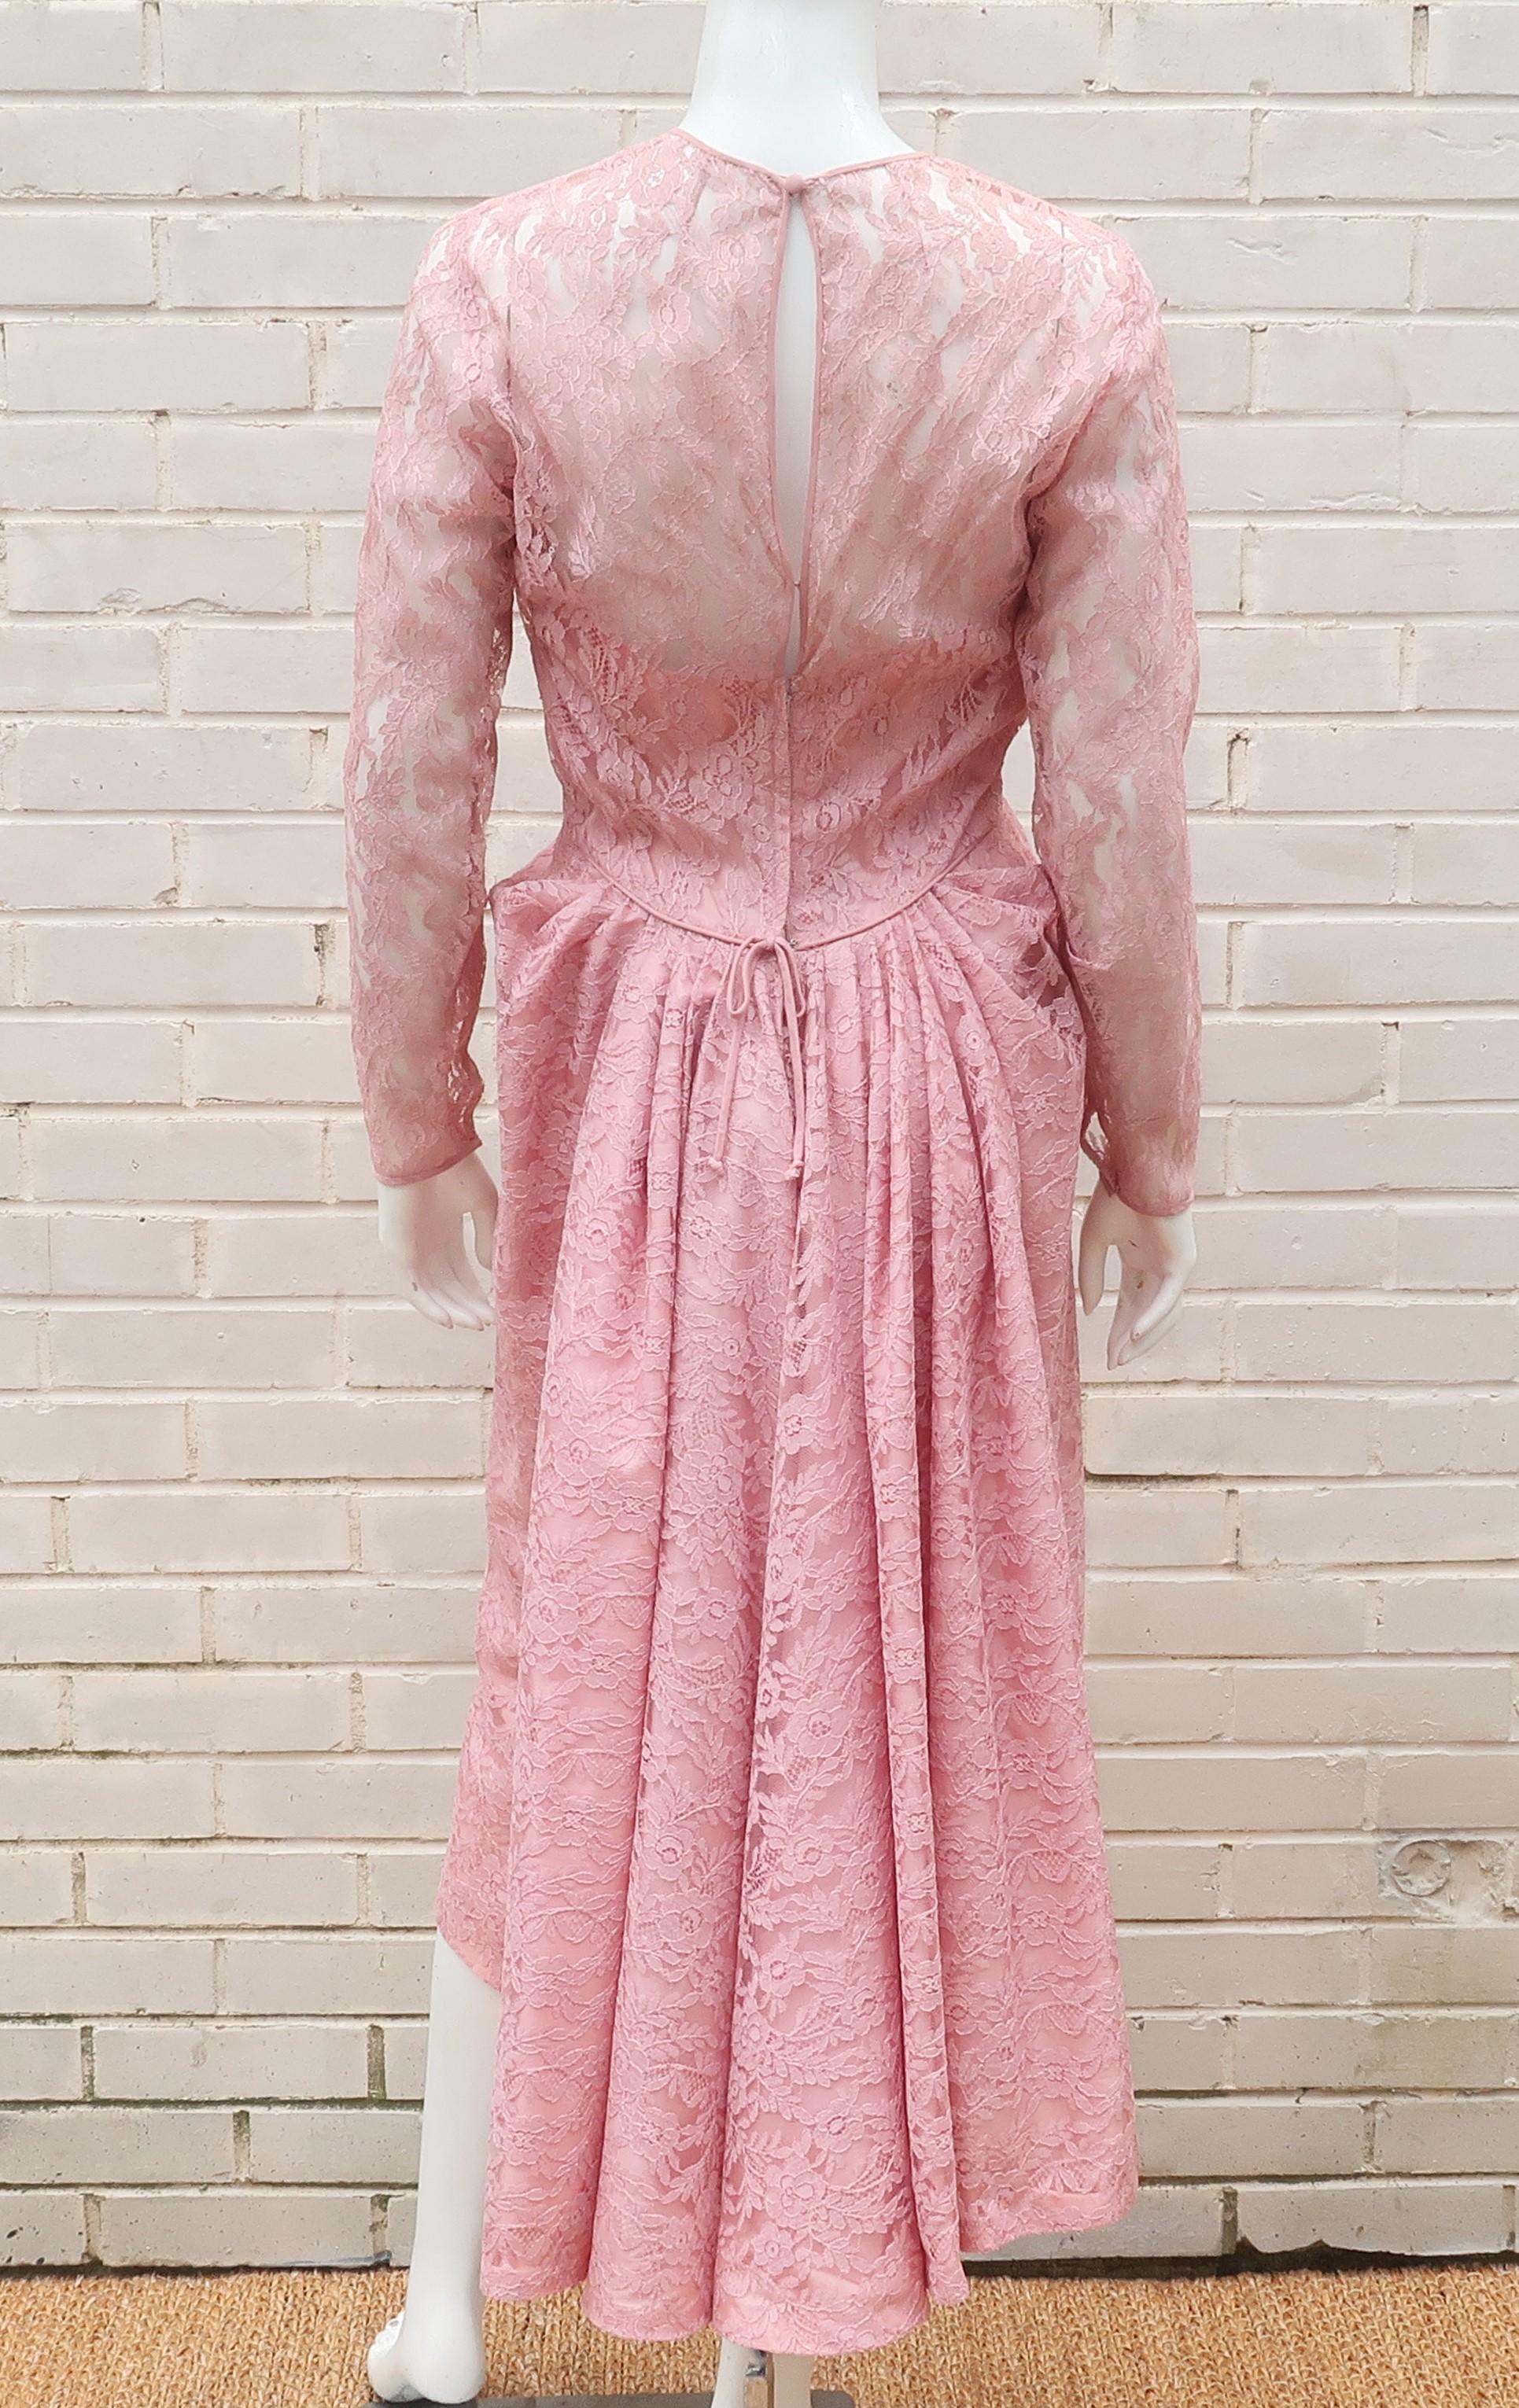 Lee Claire Pink Lace Cocktail Dress, 1950's For Sale 3